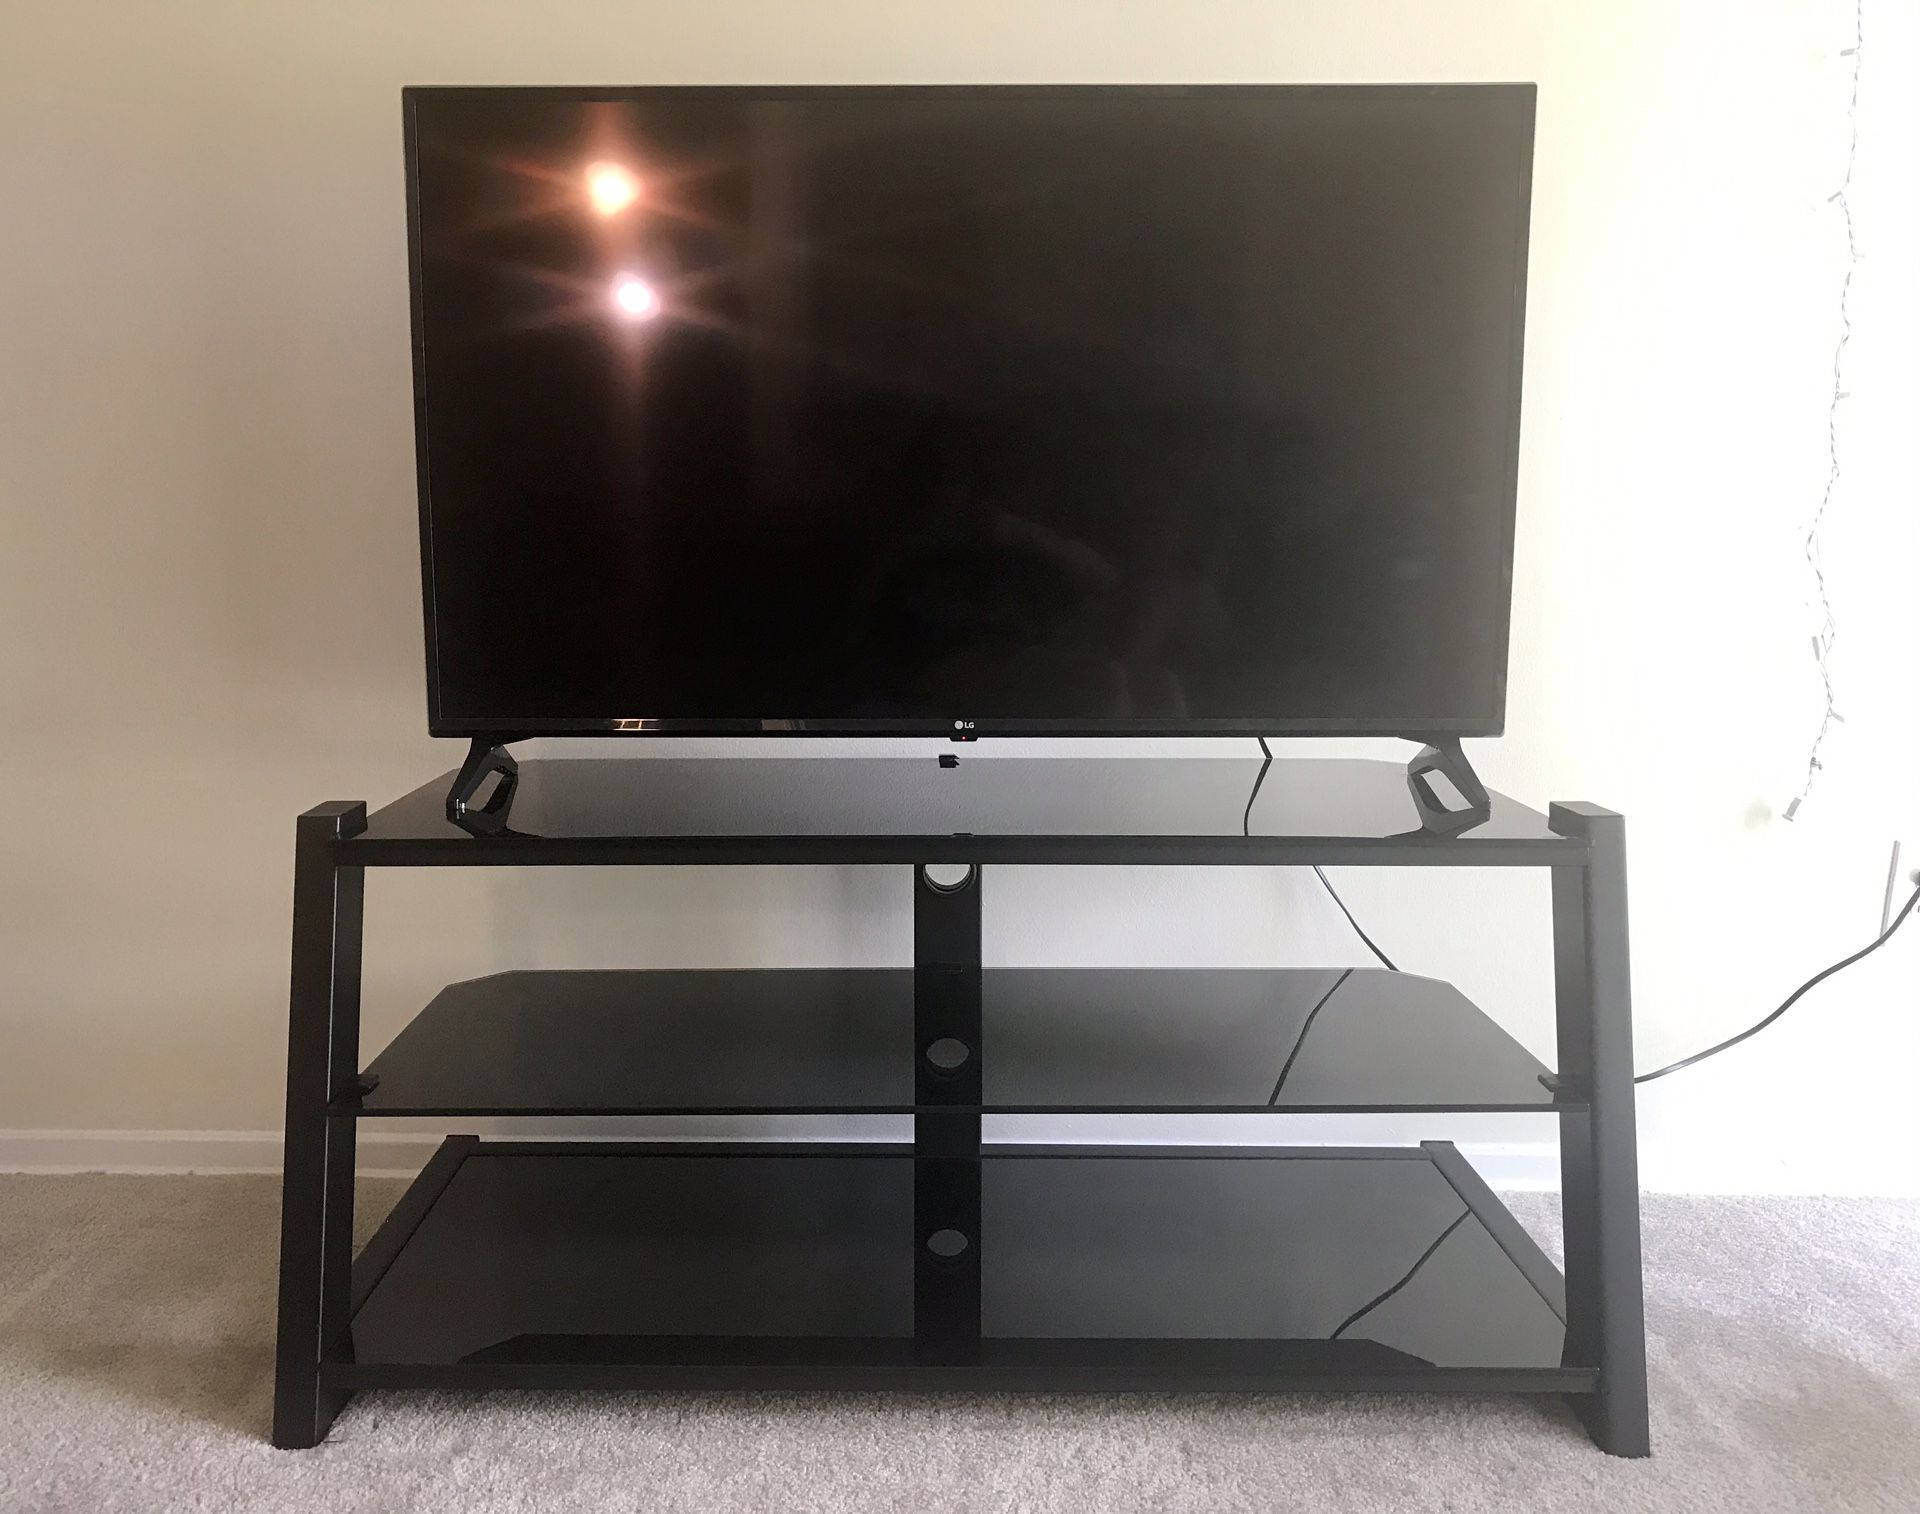 Black glass/metal TV stand (50 inches)